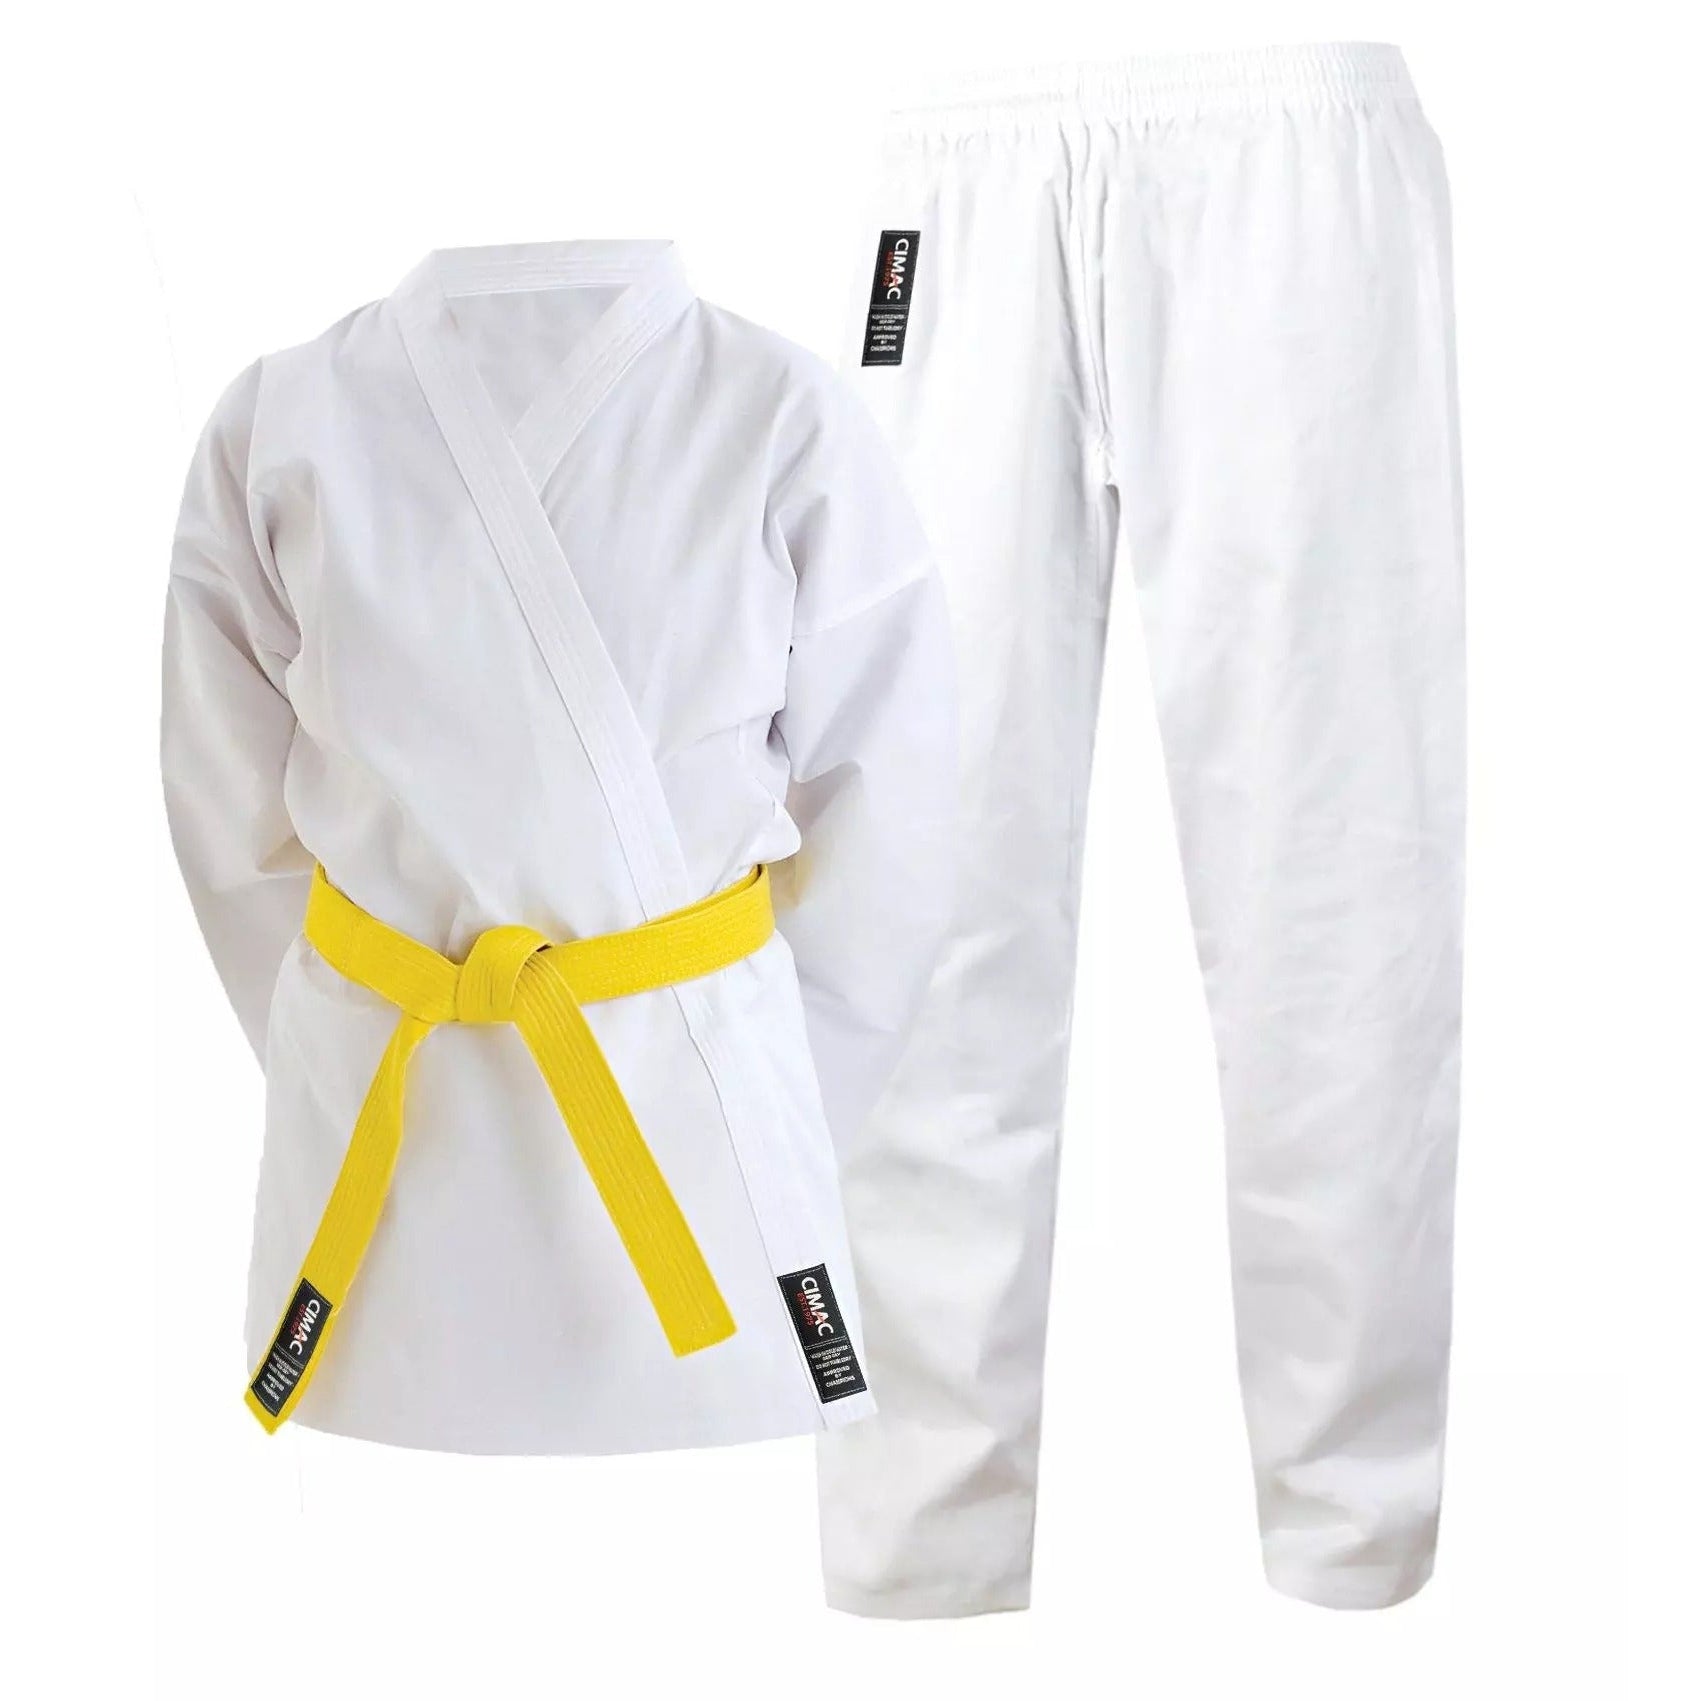 Cimac Karate Gi 7oz Suit Youth & Adults With White Belt